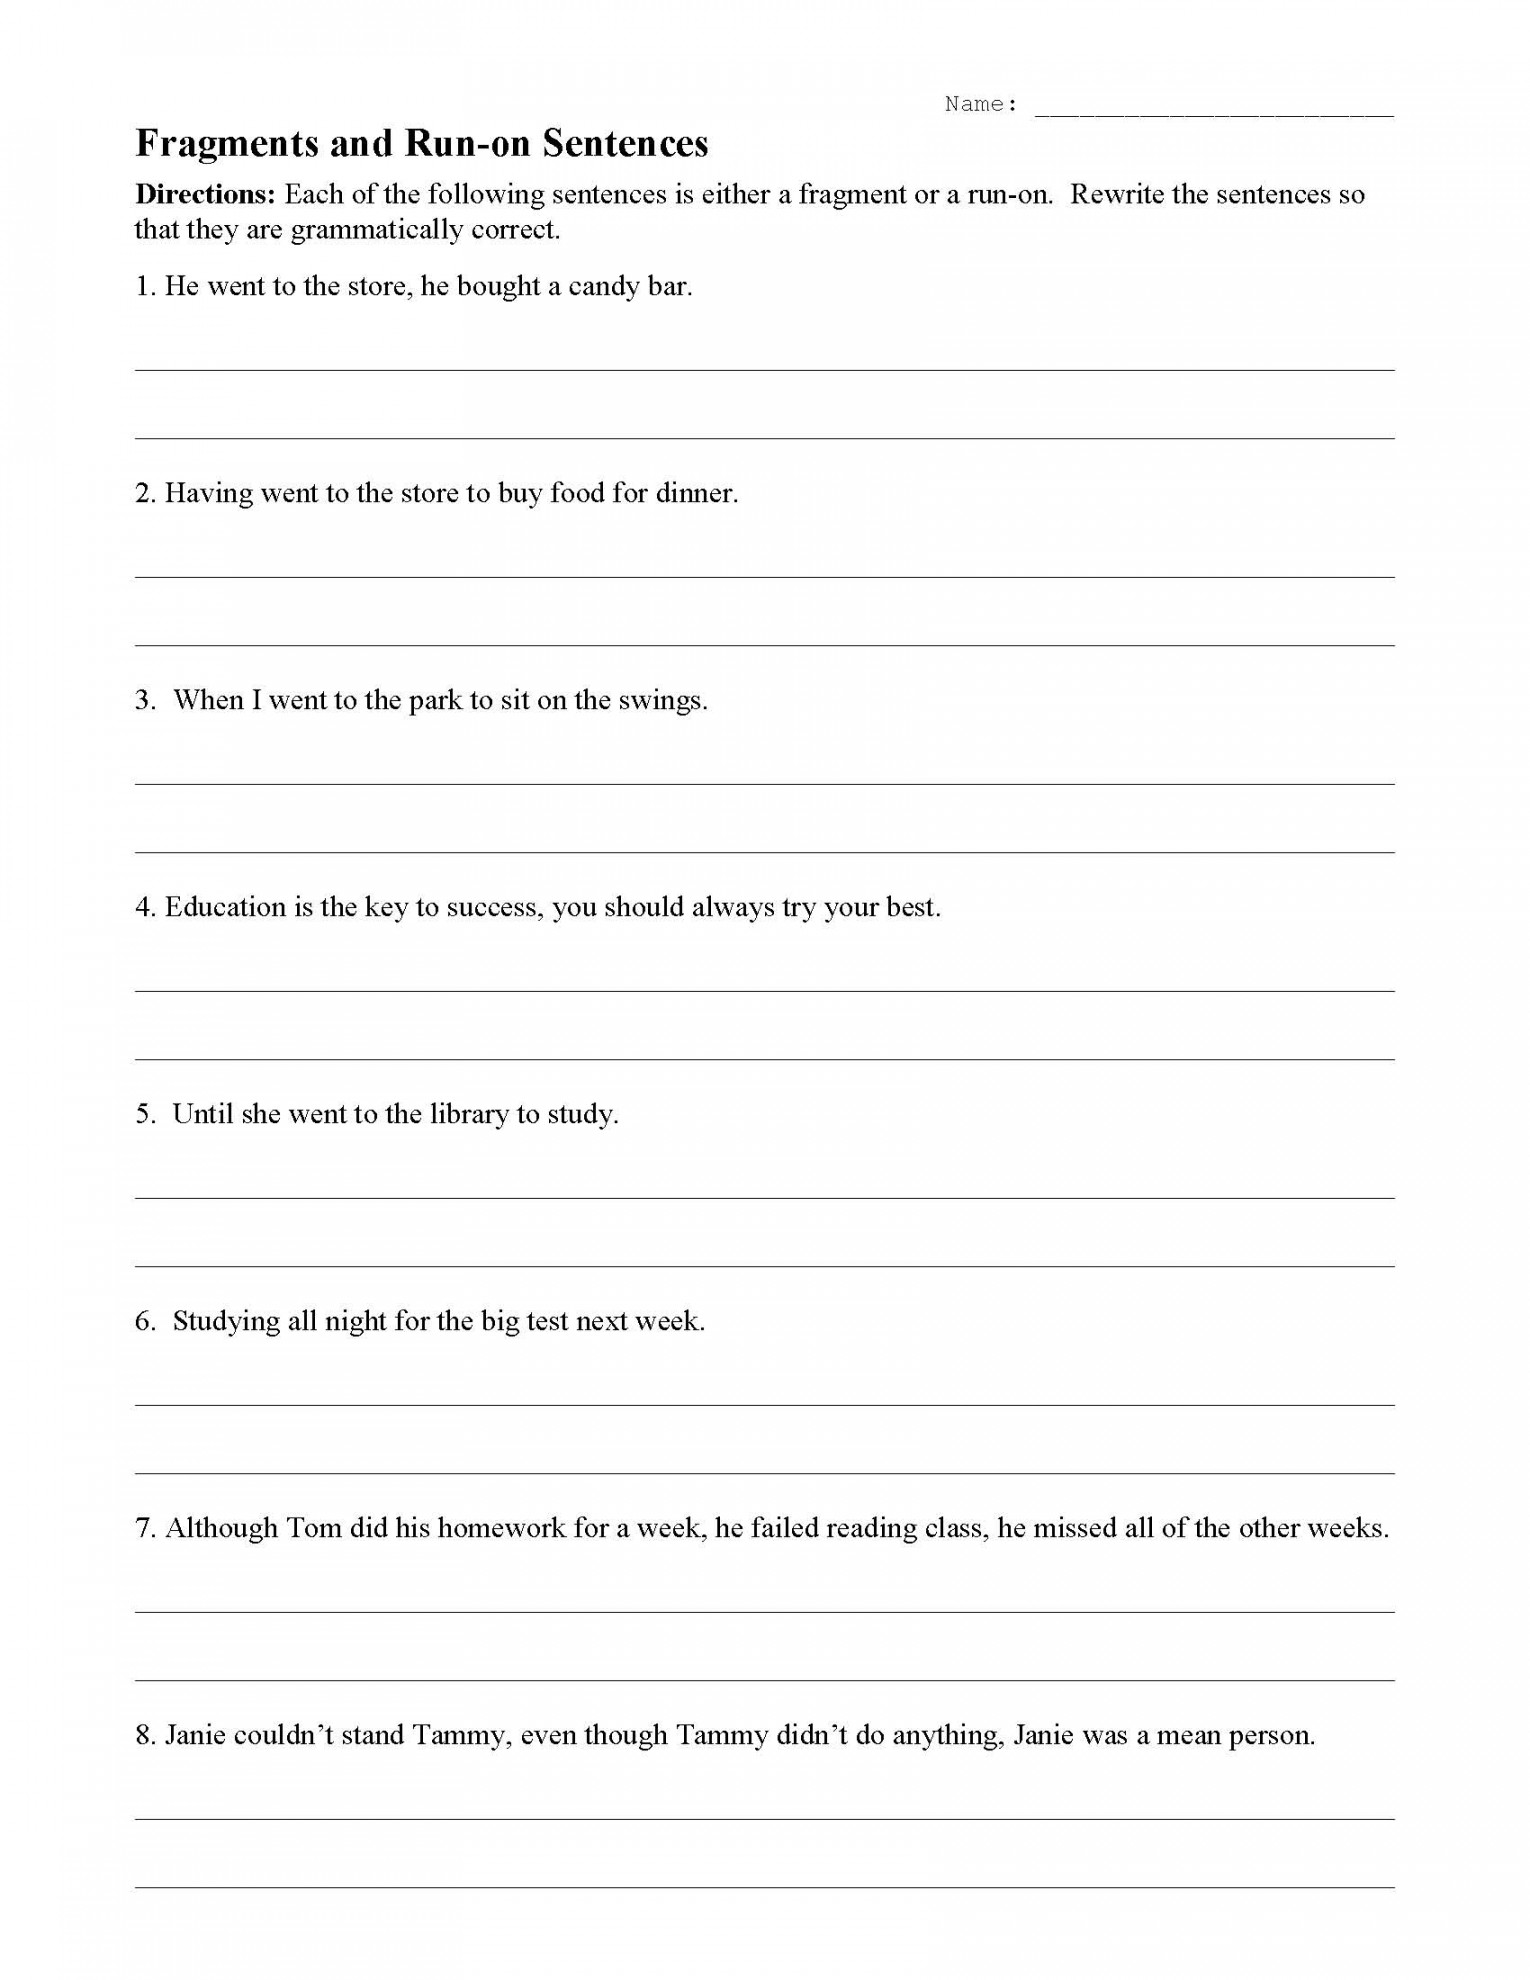 Fragments and Run-On Sentences Worksheet  Sentence Structure Activity